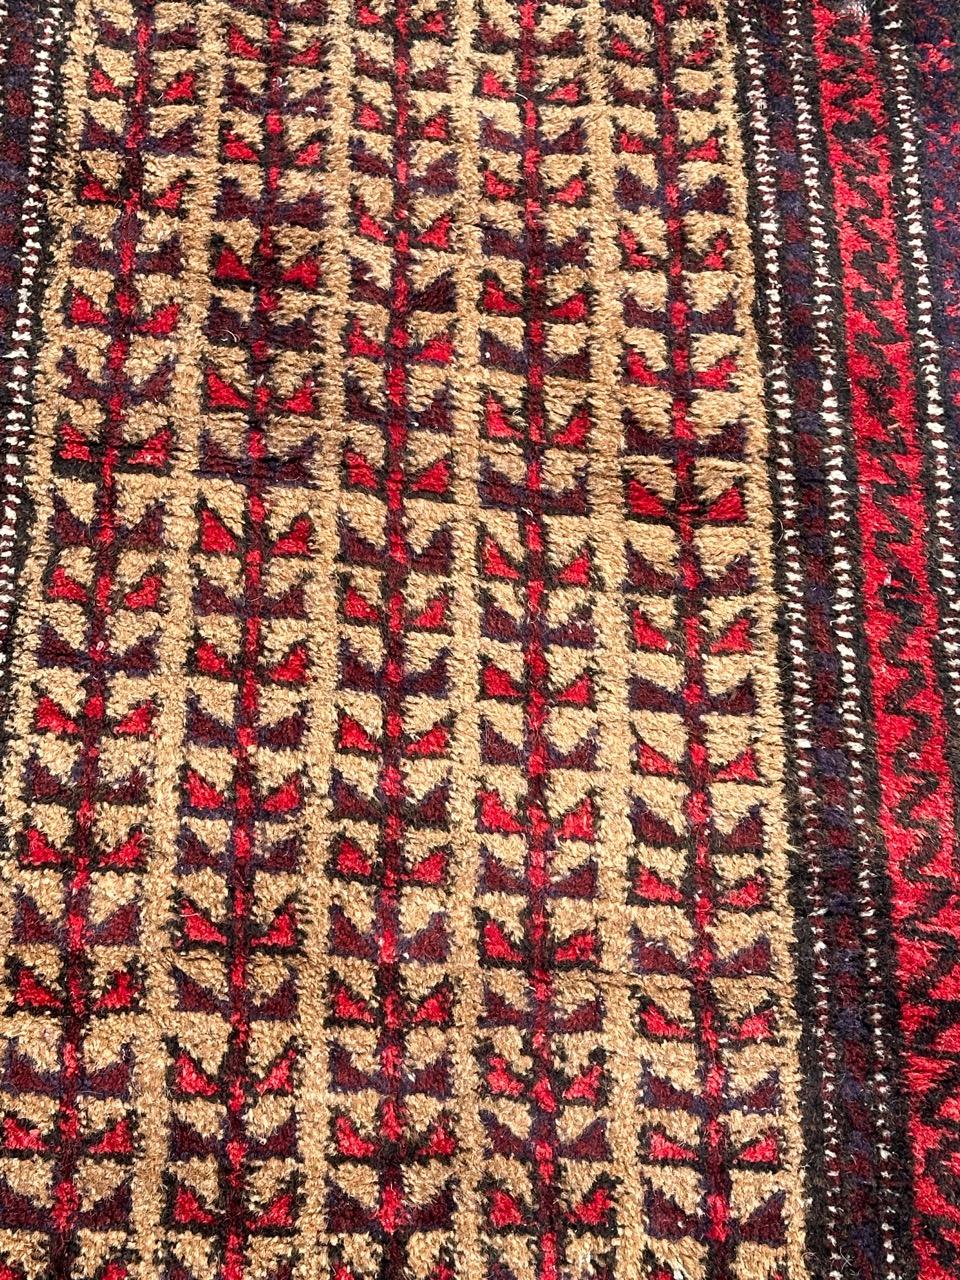 Tribal nice small vintage Baluch rug  For Sale